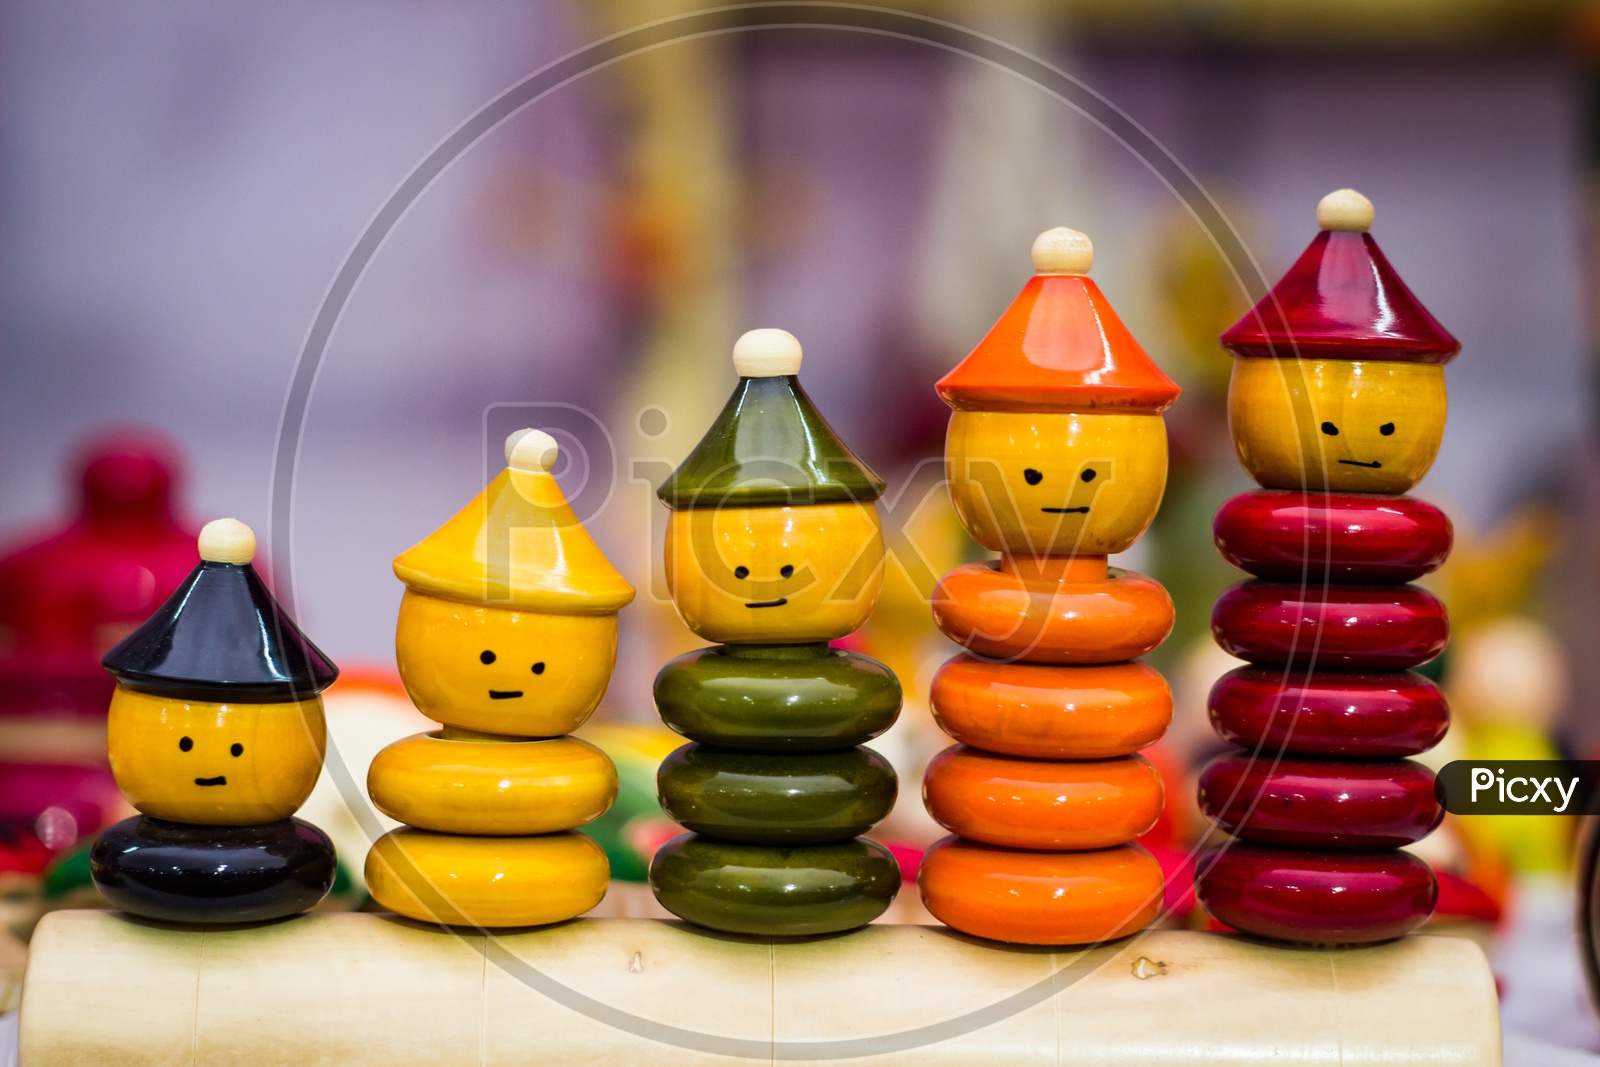 Colourful Ring Toy Stacking Doll Figures With Increasing Sizes